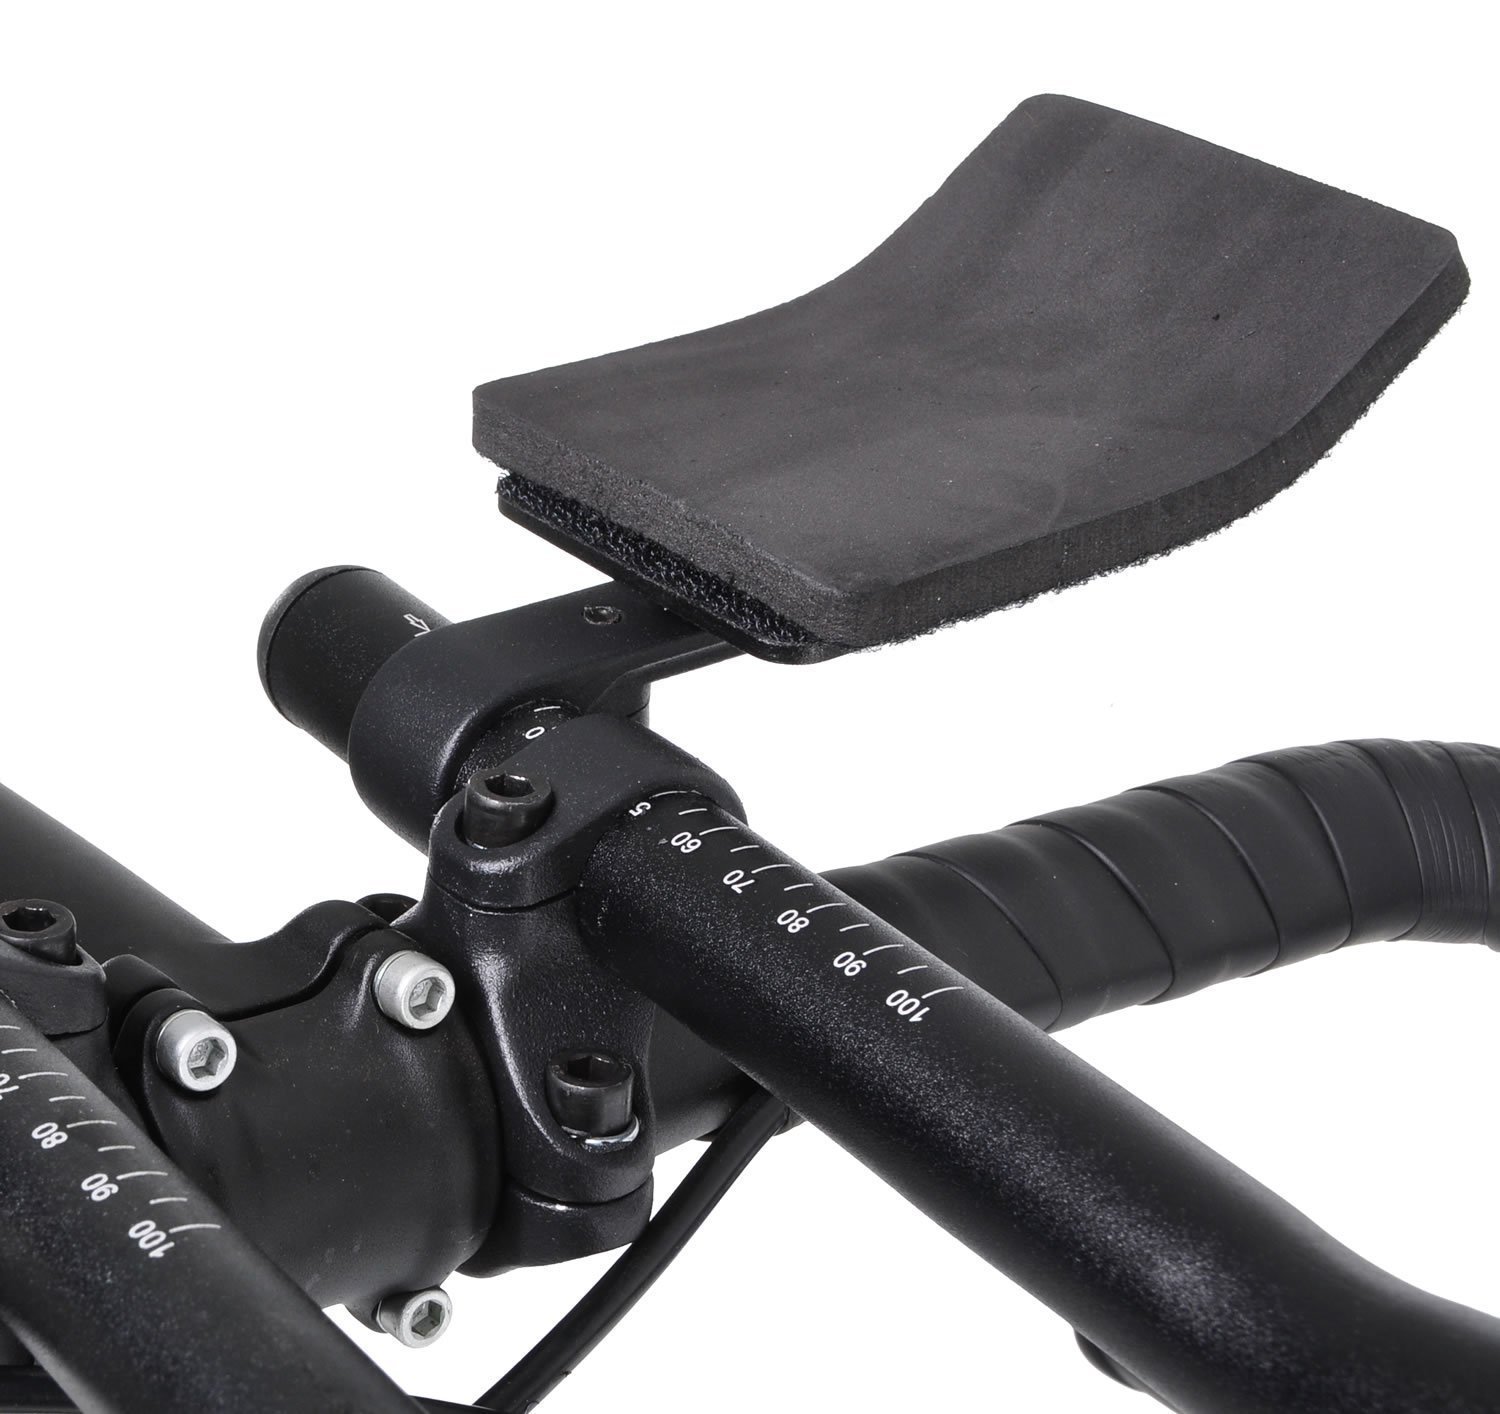 Conquer Aero Bars Hand Rest Review